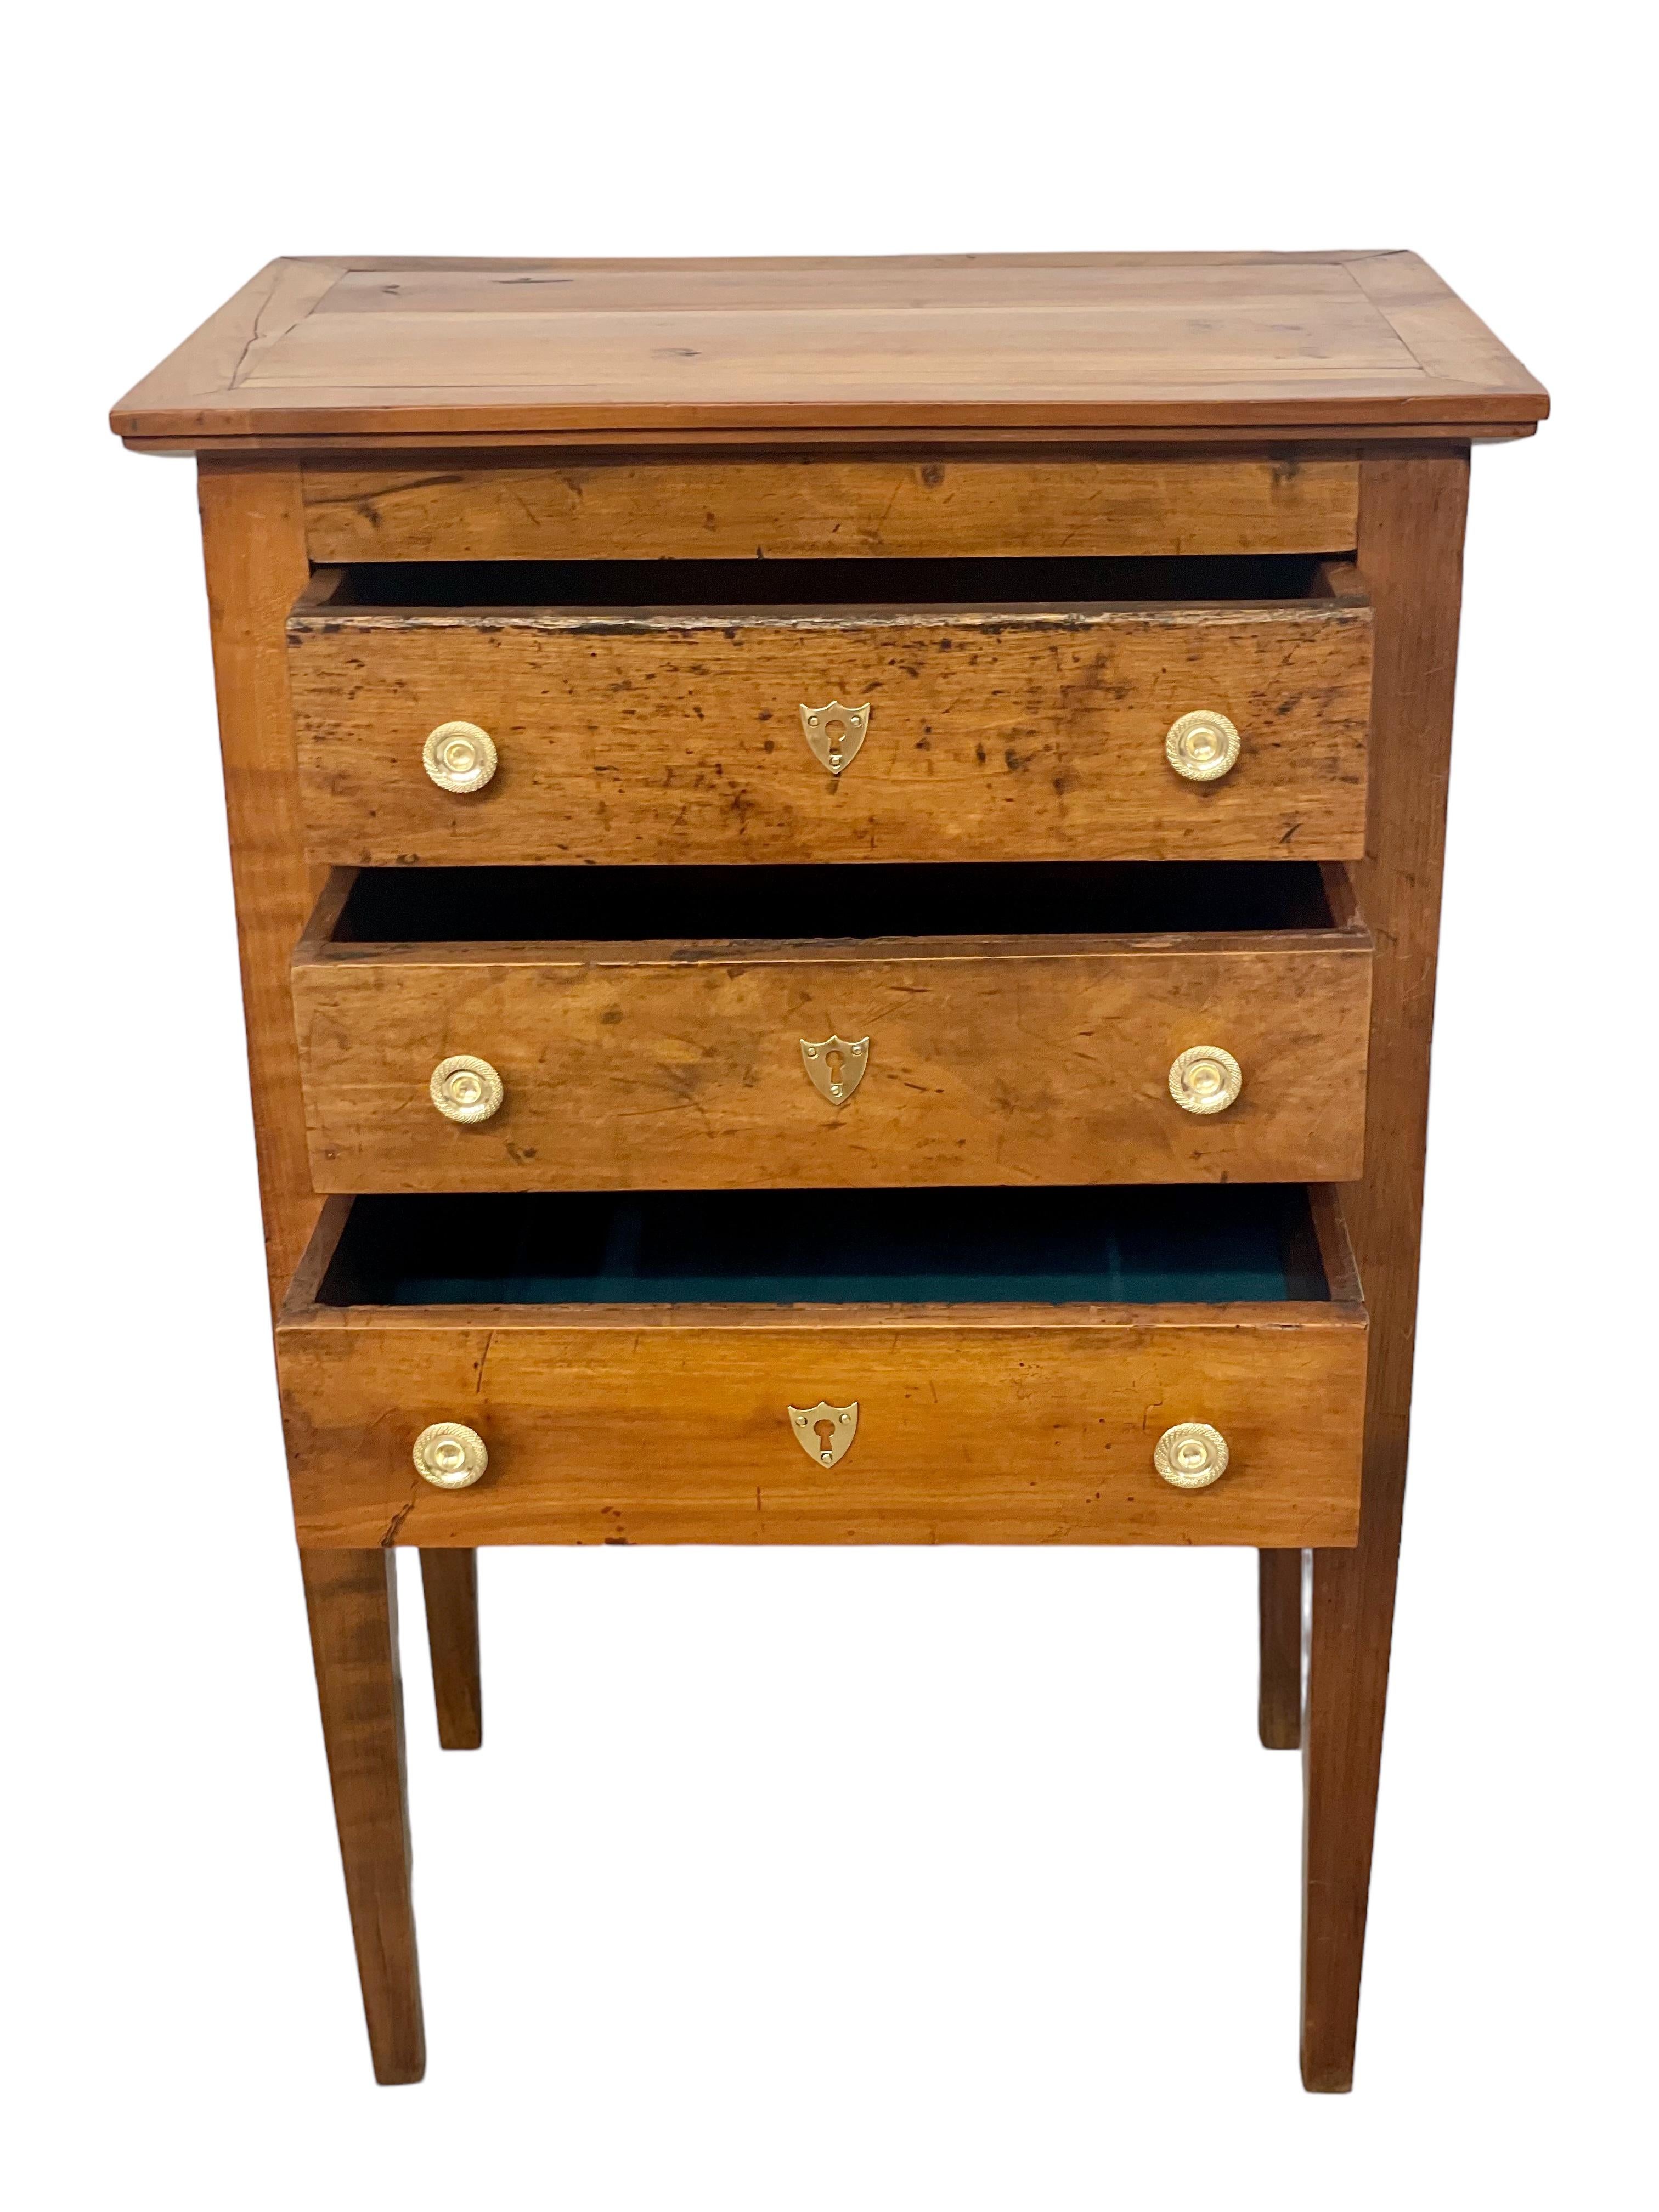 19th Century French Walnut Chest of Drawers or 'Chiffonnier' For Sale 13